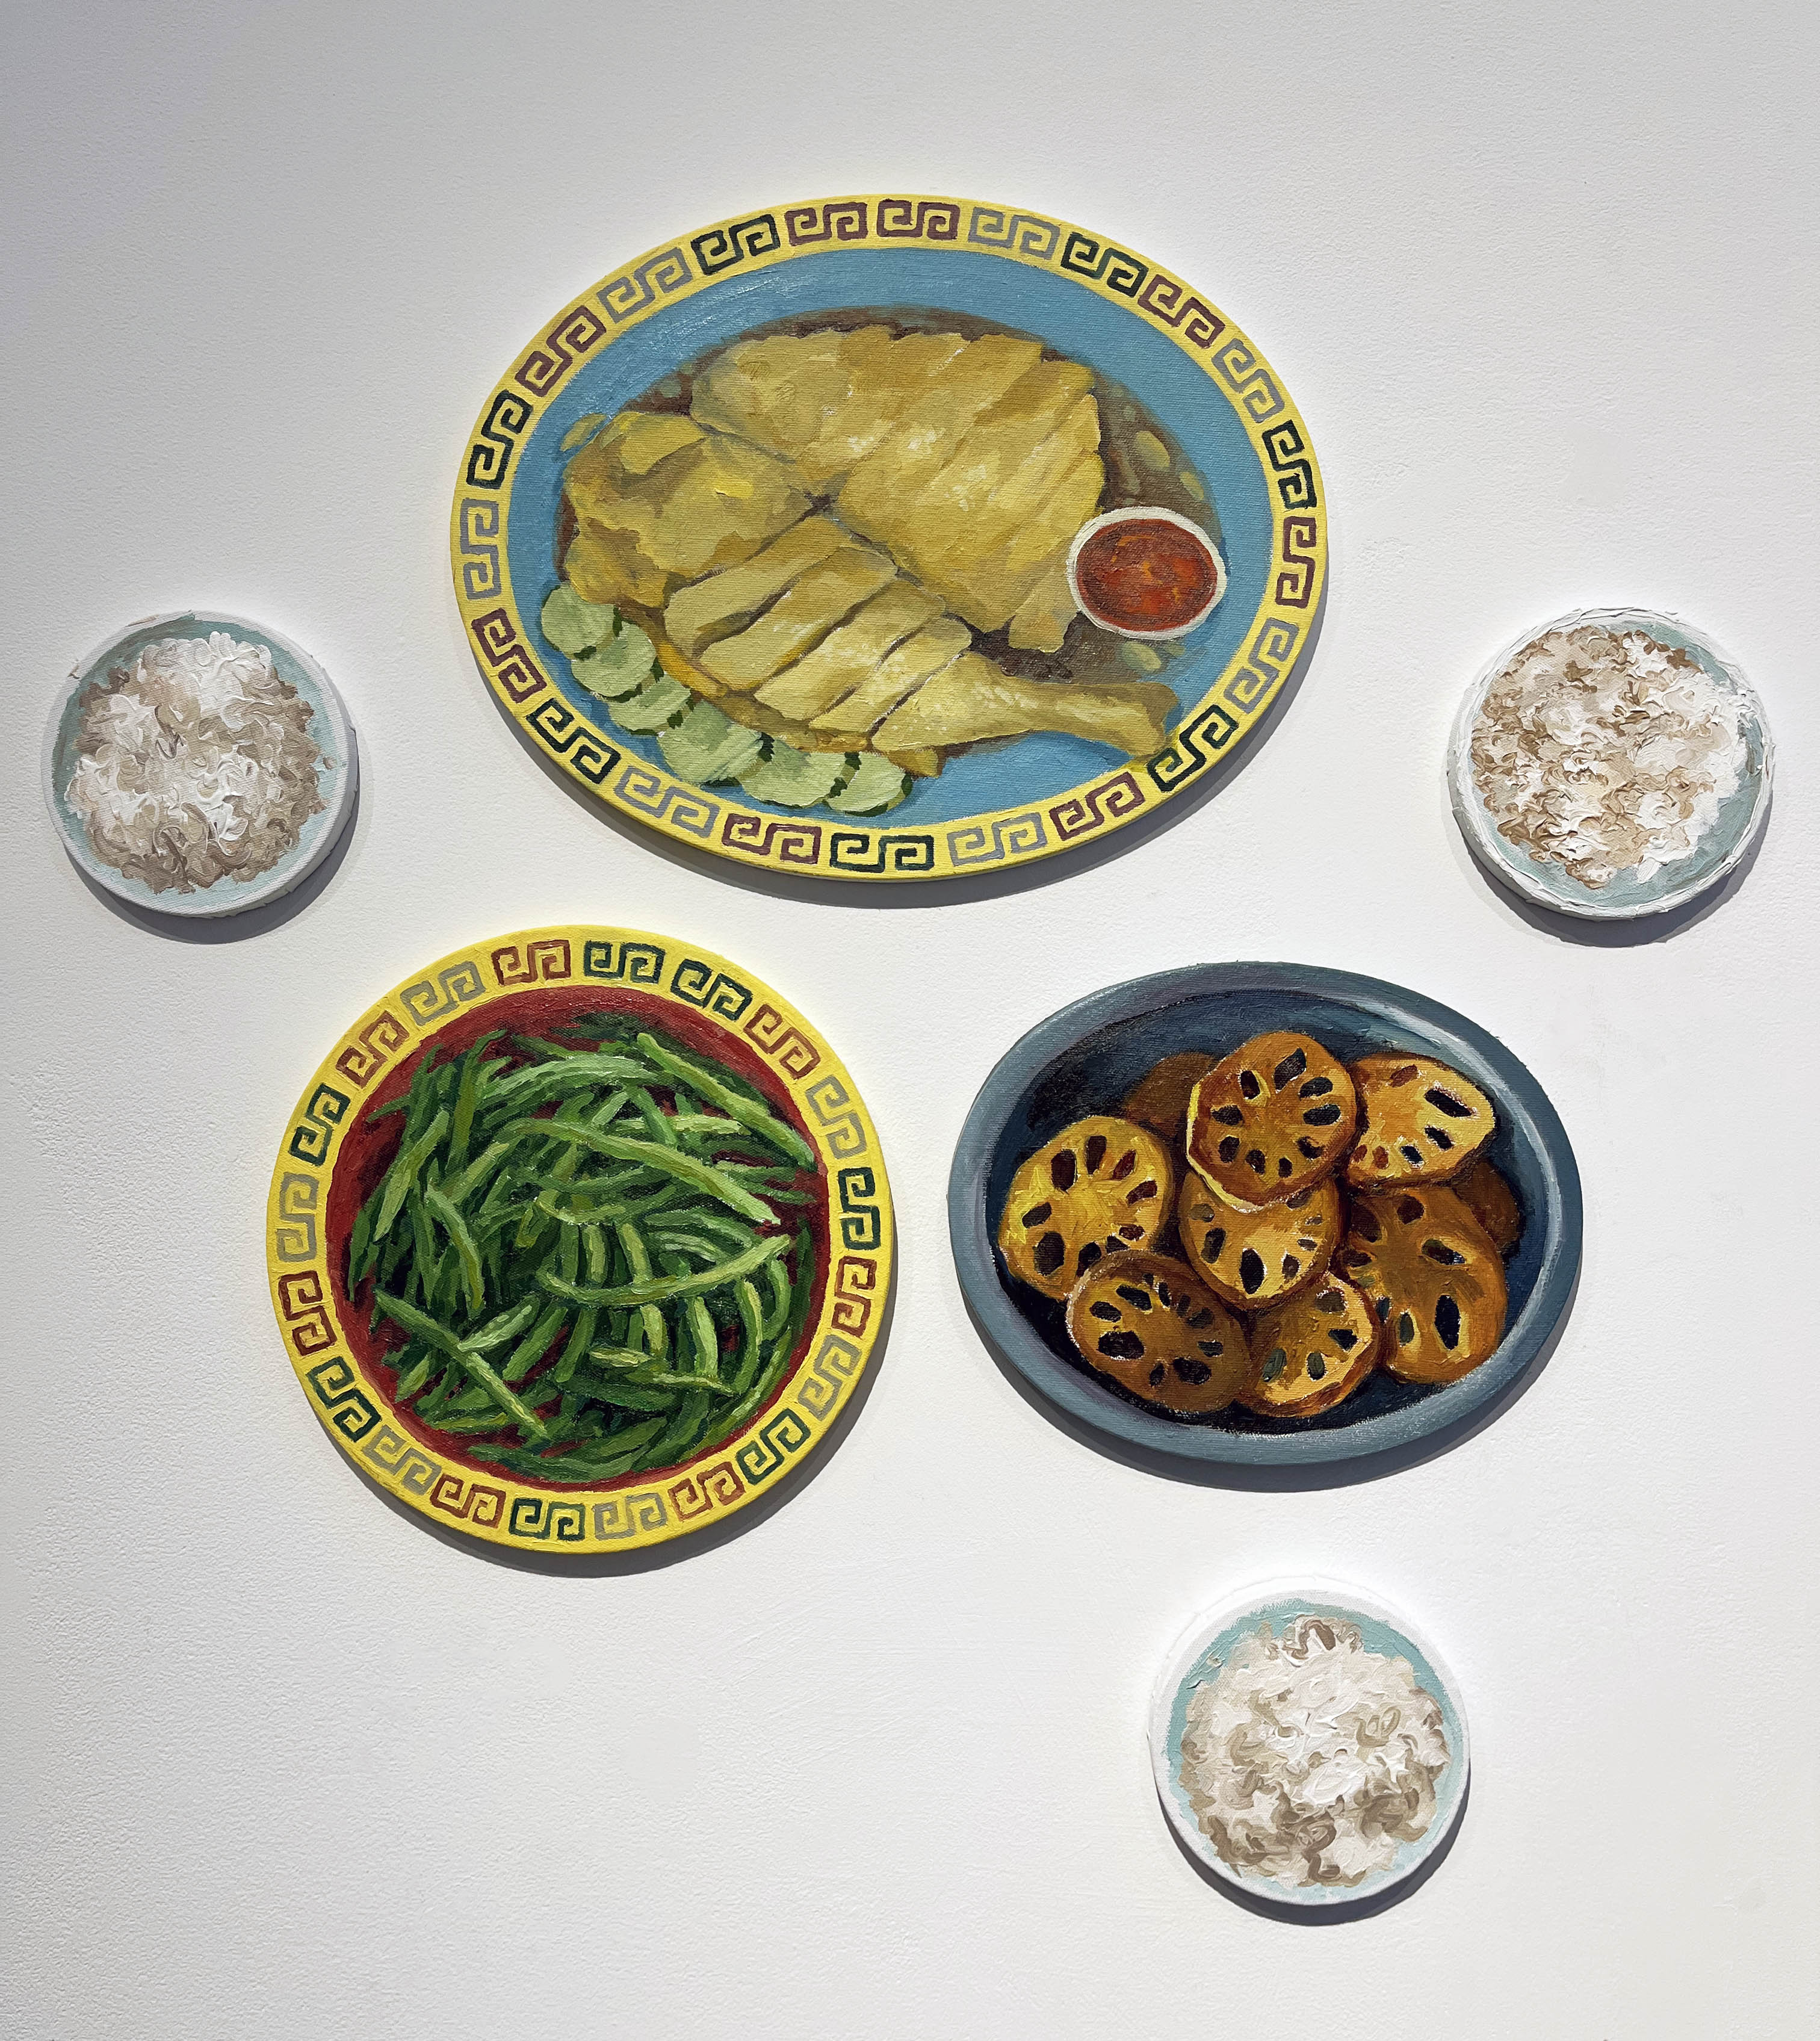 A group of 6 circular paintings, three smaller ones of which depict rice bowls, one larger oval painting of Hainanese chicken with cucumber and sweet and spicy sauce, a larger circle painting of Sichuan dry fried string beans, and a larger oval painting of sauteed lotus root. The paintings are arranged like a family-style meal.